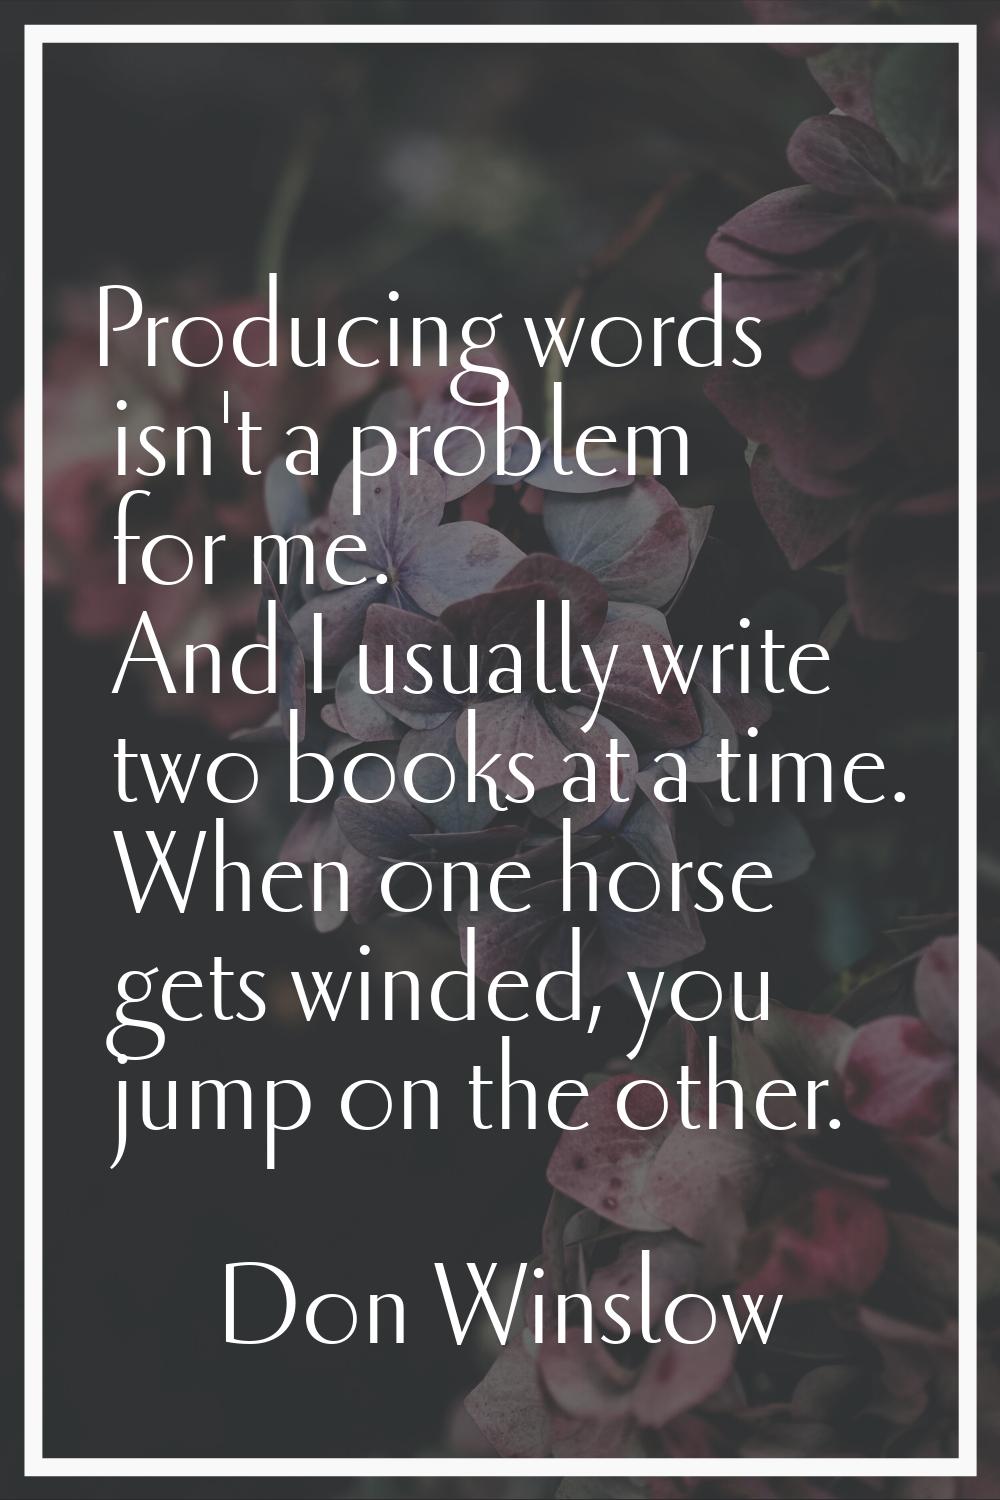 Producing words isn't a problem for me. And I usually write two books at a time. When one horse get